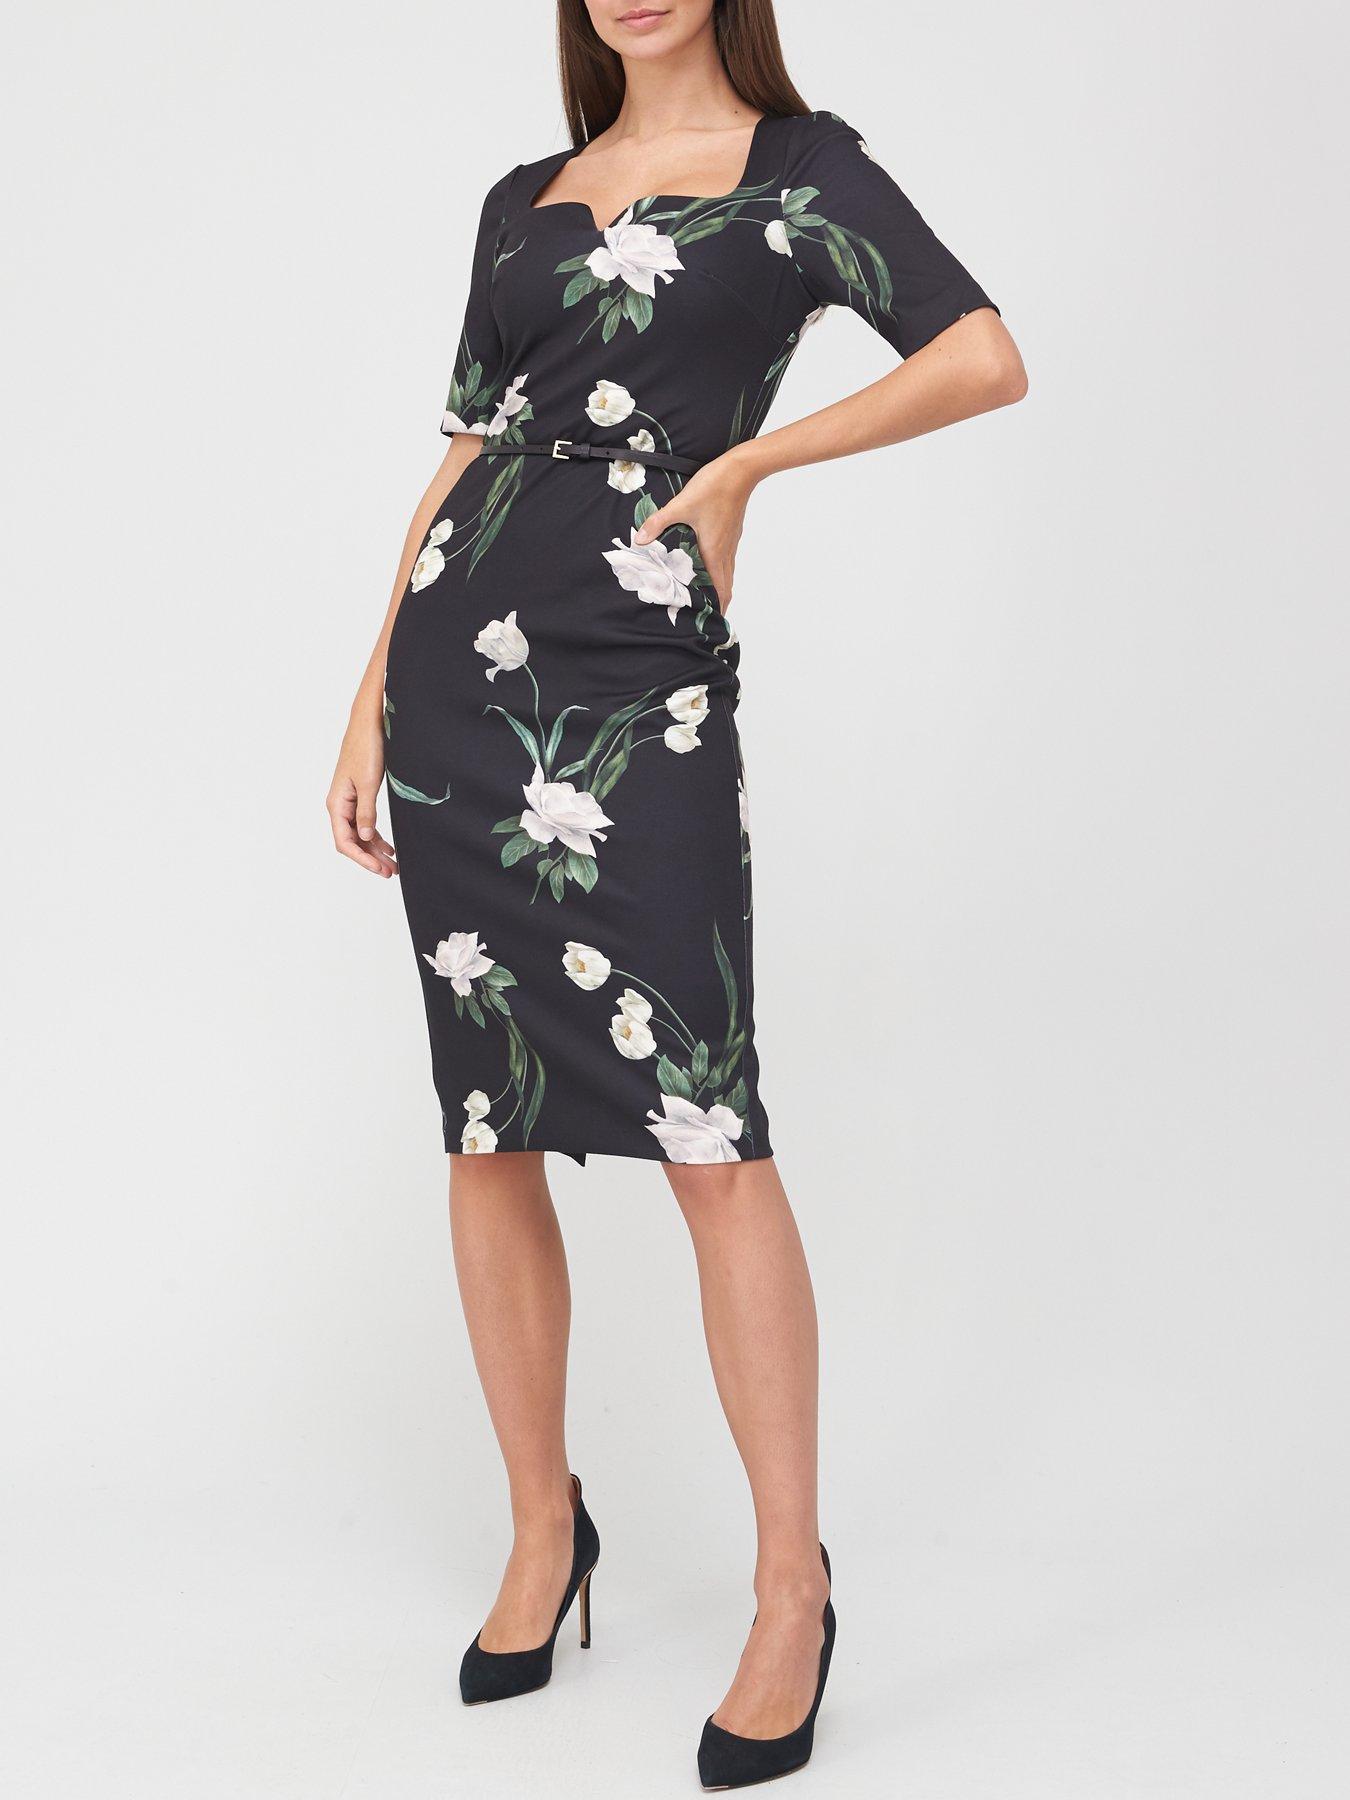 ted baker party dresses uk